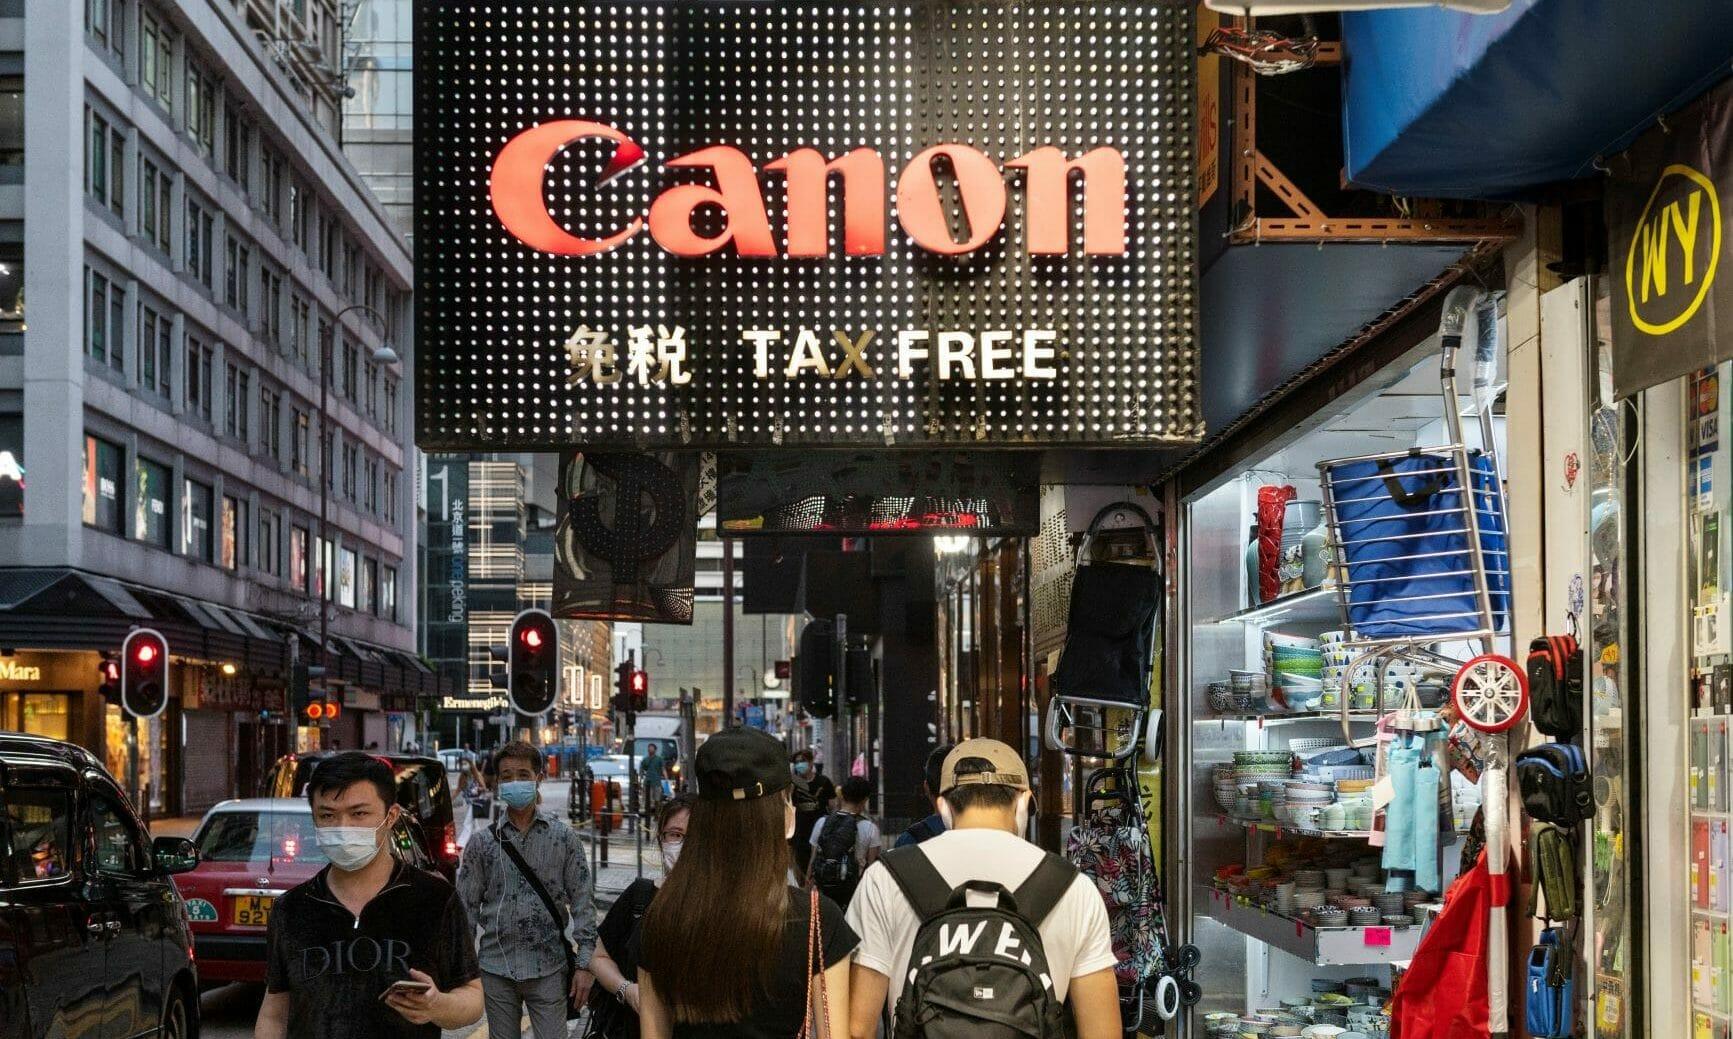 A Canon sign on a store in Hong Kong. Canon was among firms to be hit by a ransomware attack and potentially have to ponder whether or not to pay up. (Photo: SOPA Images / Contributor via Getty Images)